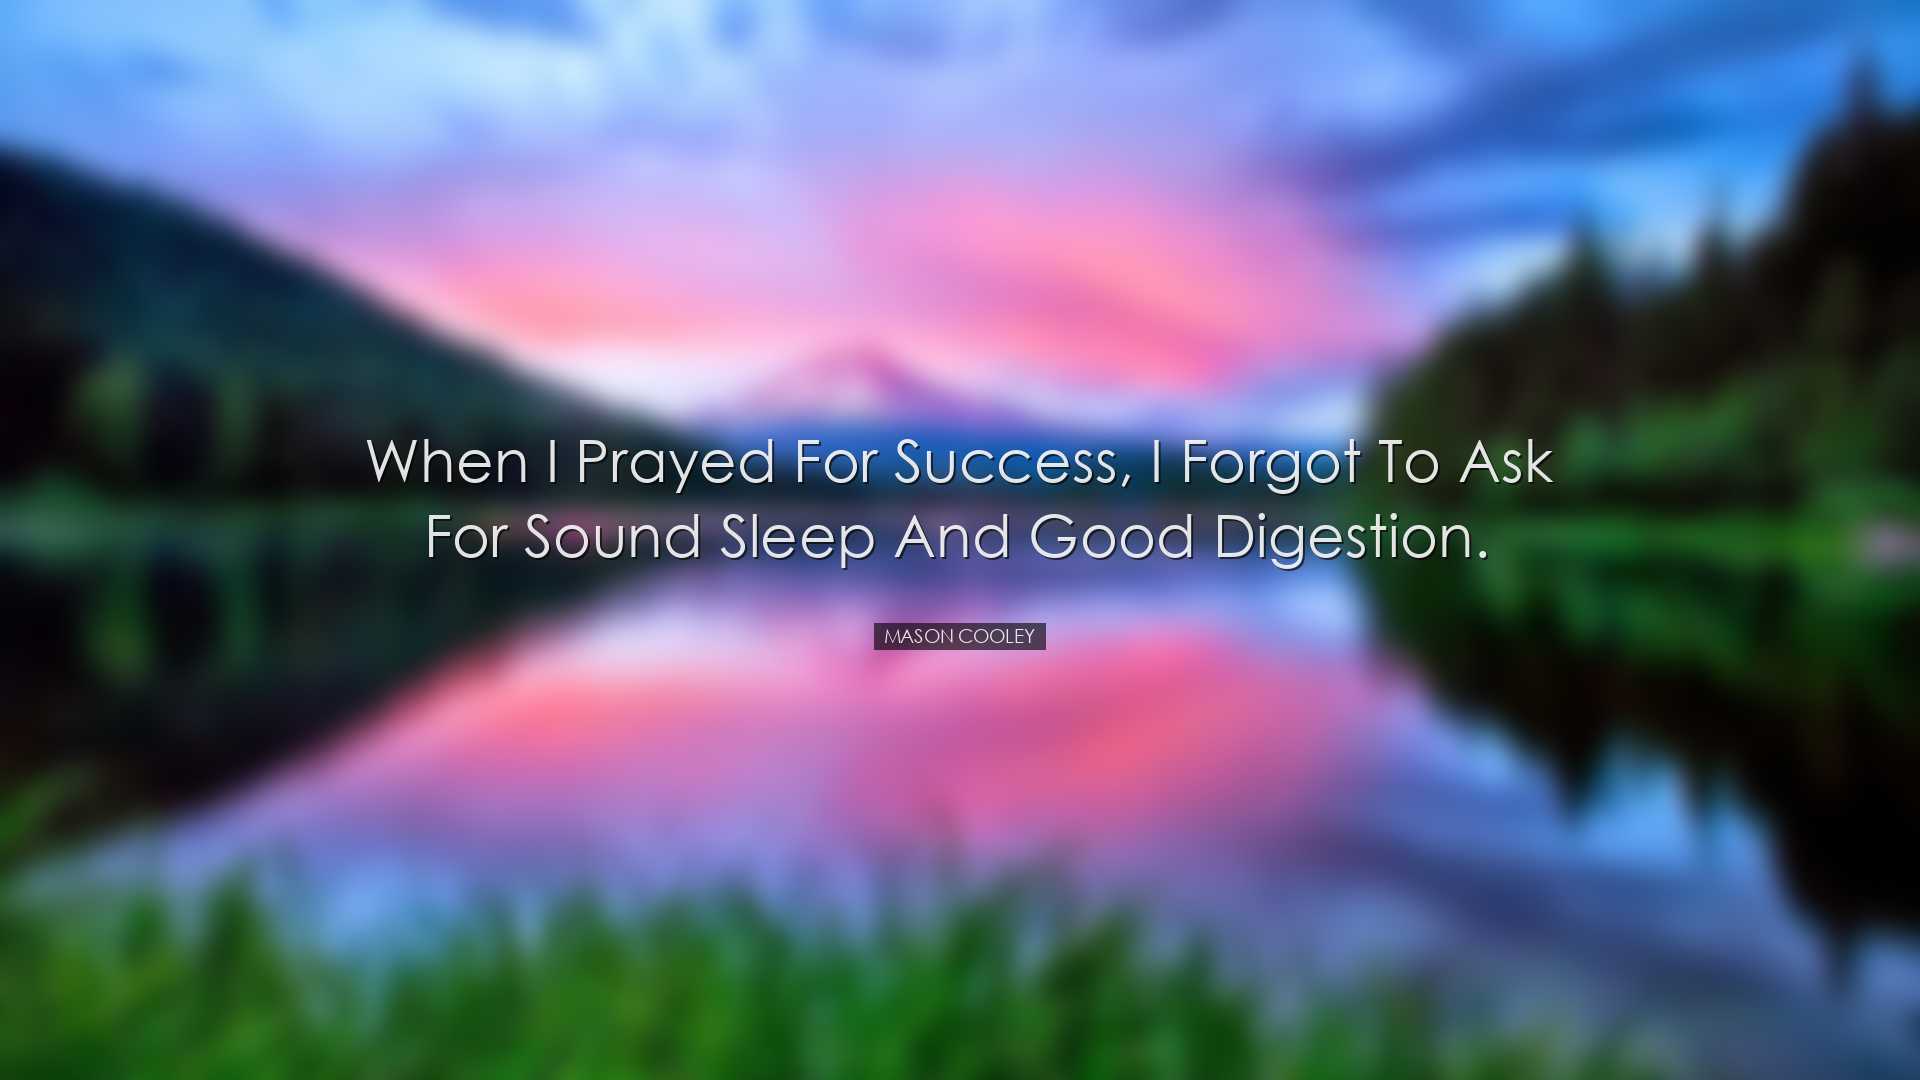 When I prayed for success, I forgot to ask for sound sleep and goo